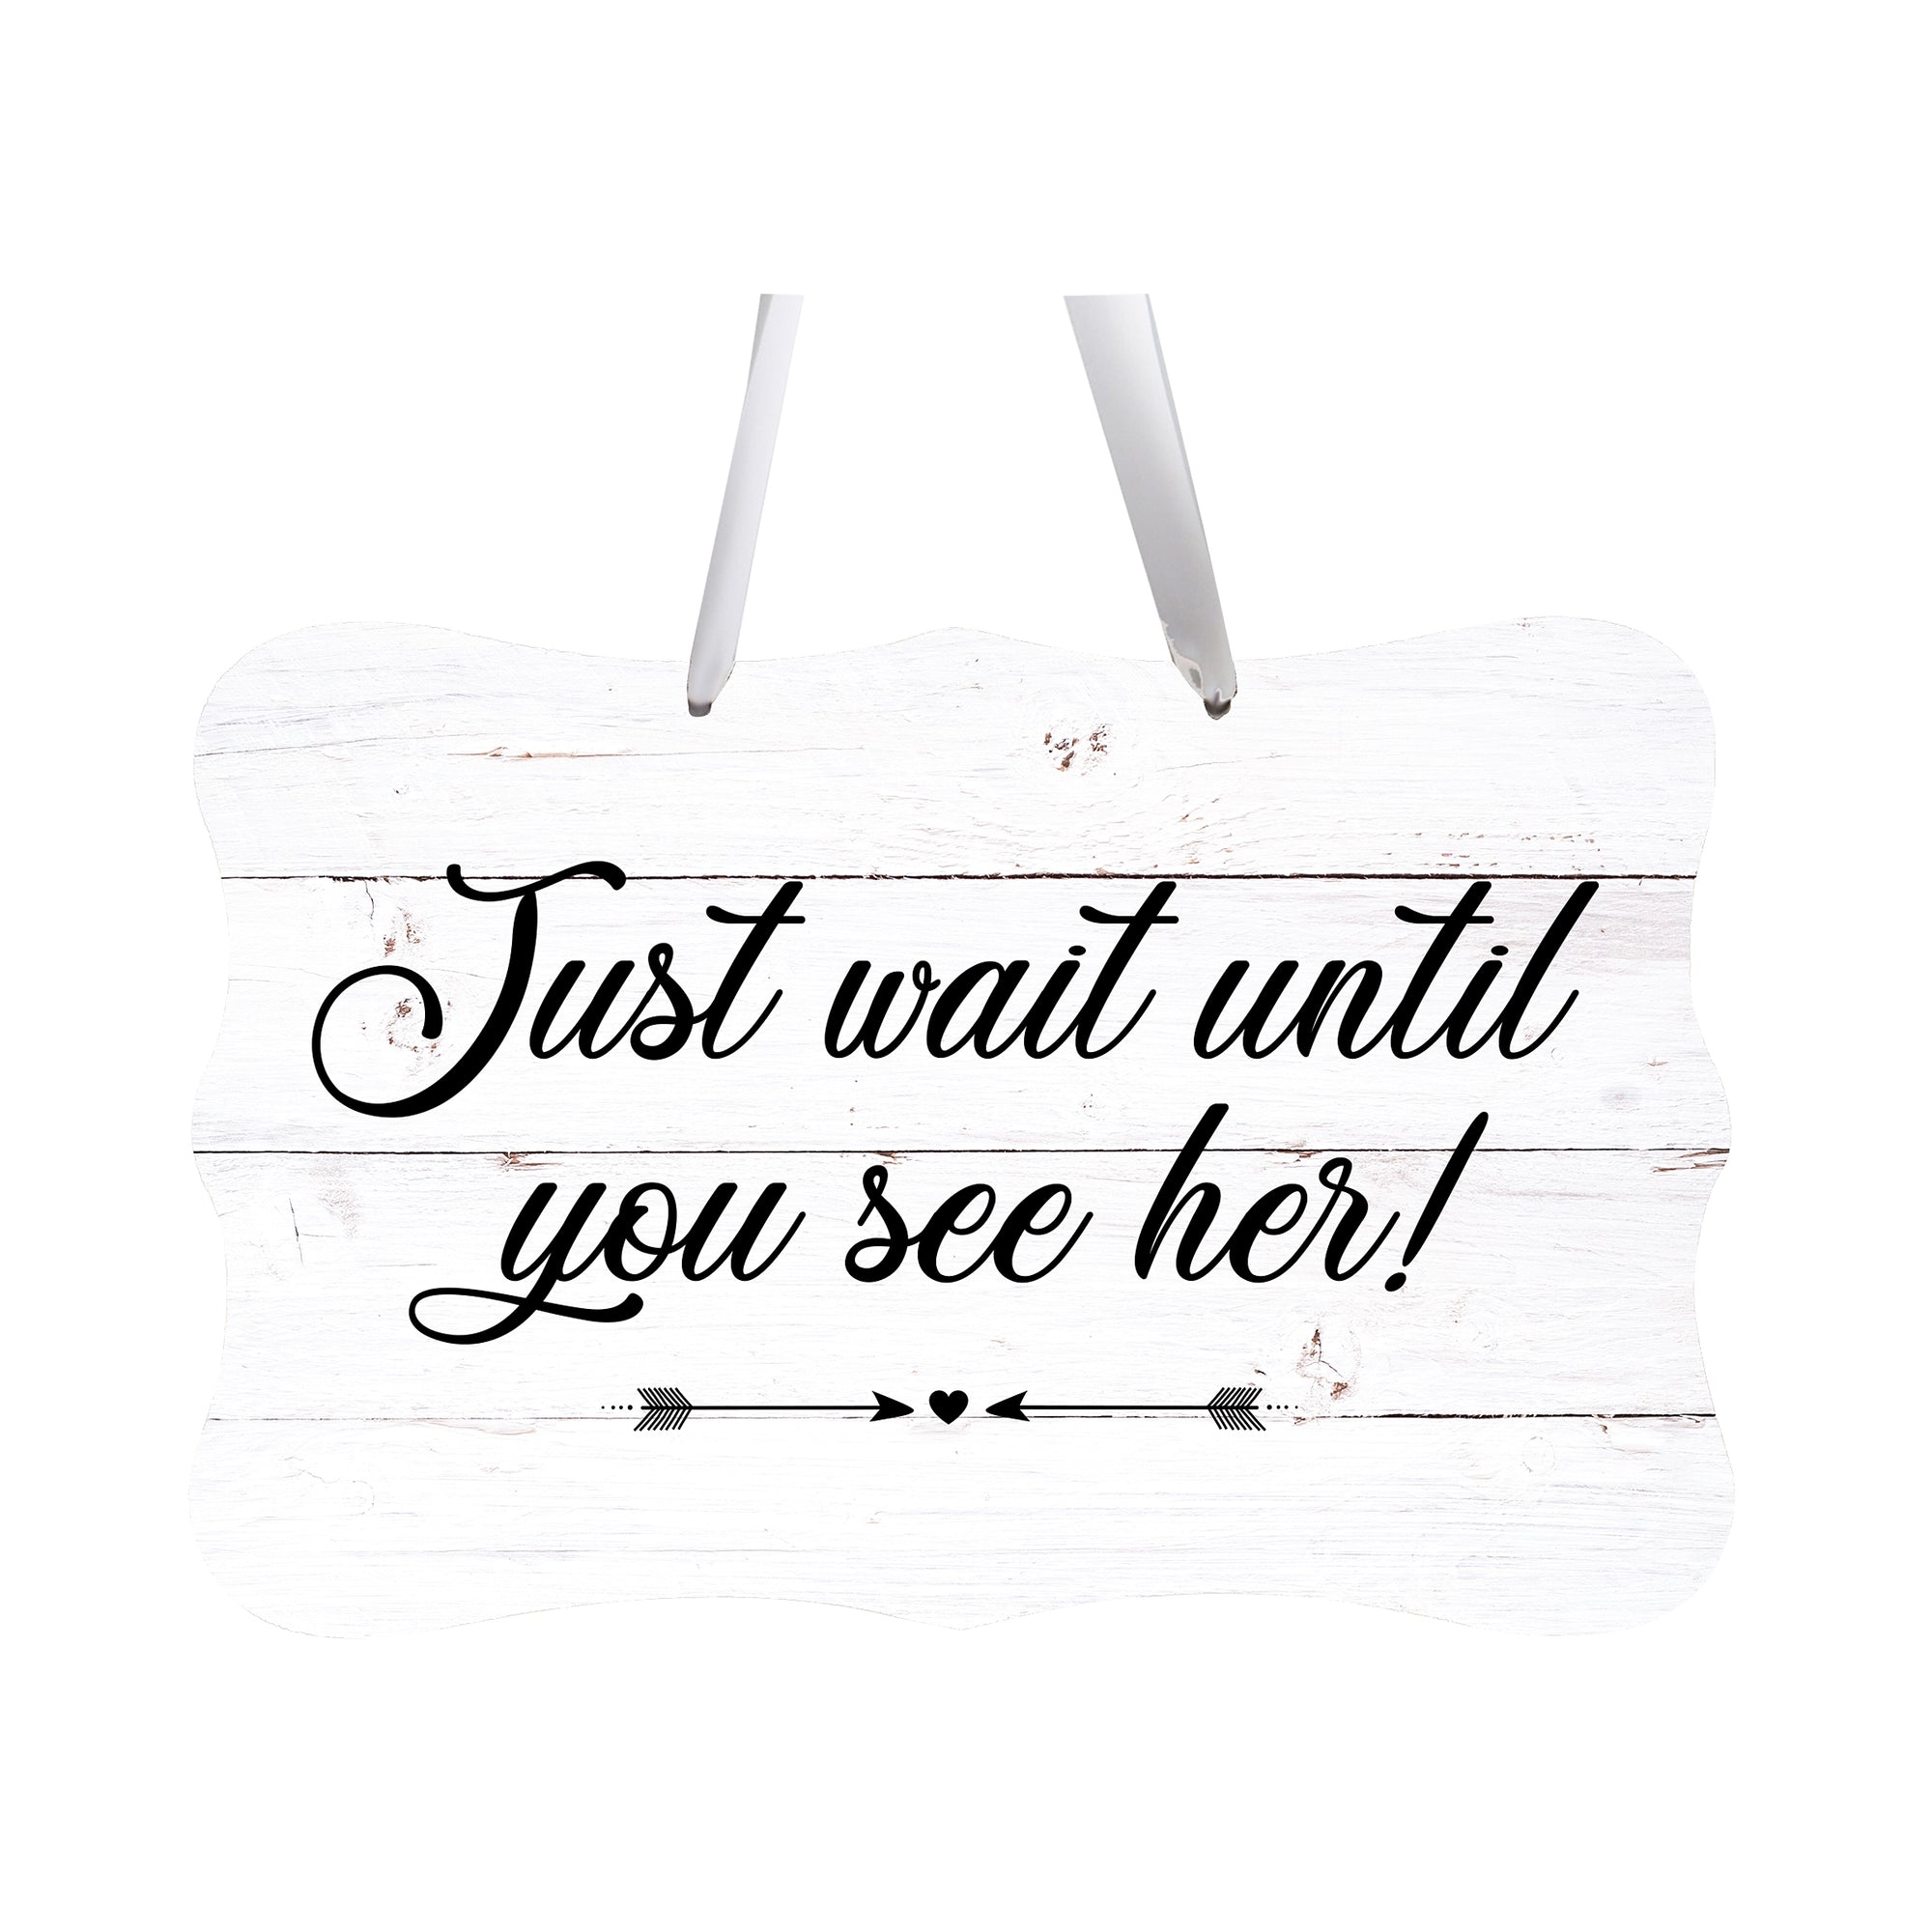 Wedding Wall Hanging Signs For Ceremony And Reception For Couples - Just Wait